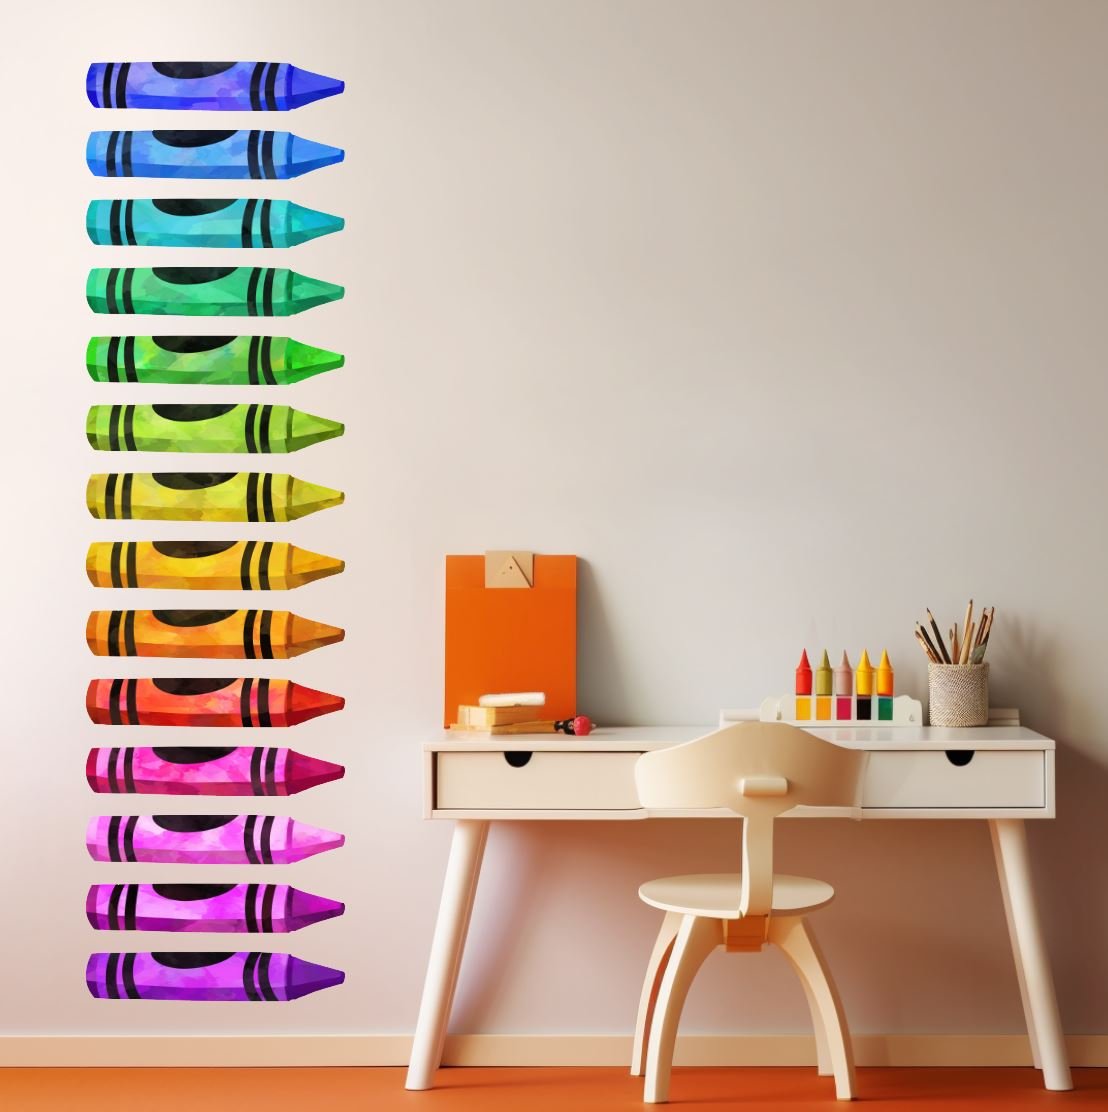 Crayon Wall Decals | Bright Rainbow Color Crayon Wall Stickers - Home Decor Decals - Picture Perfect Decals